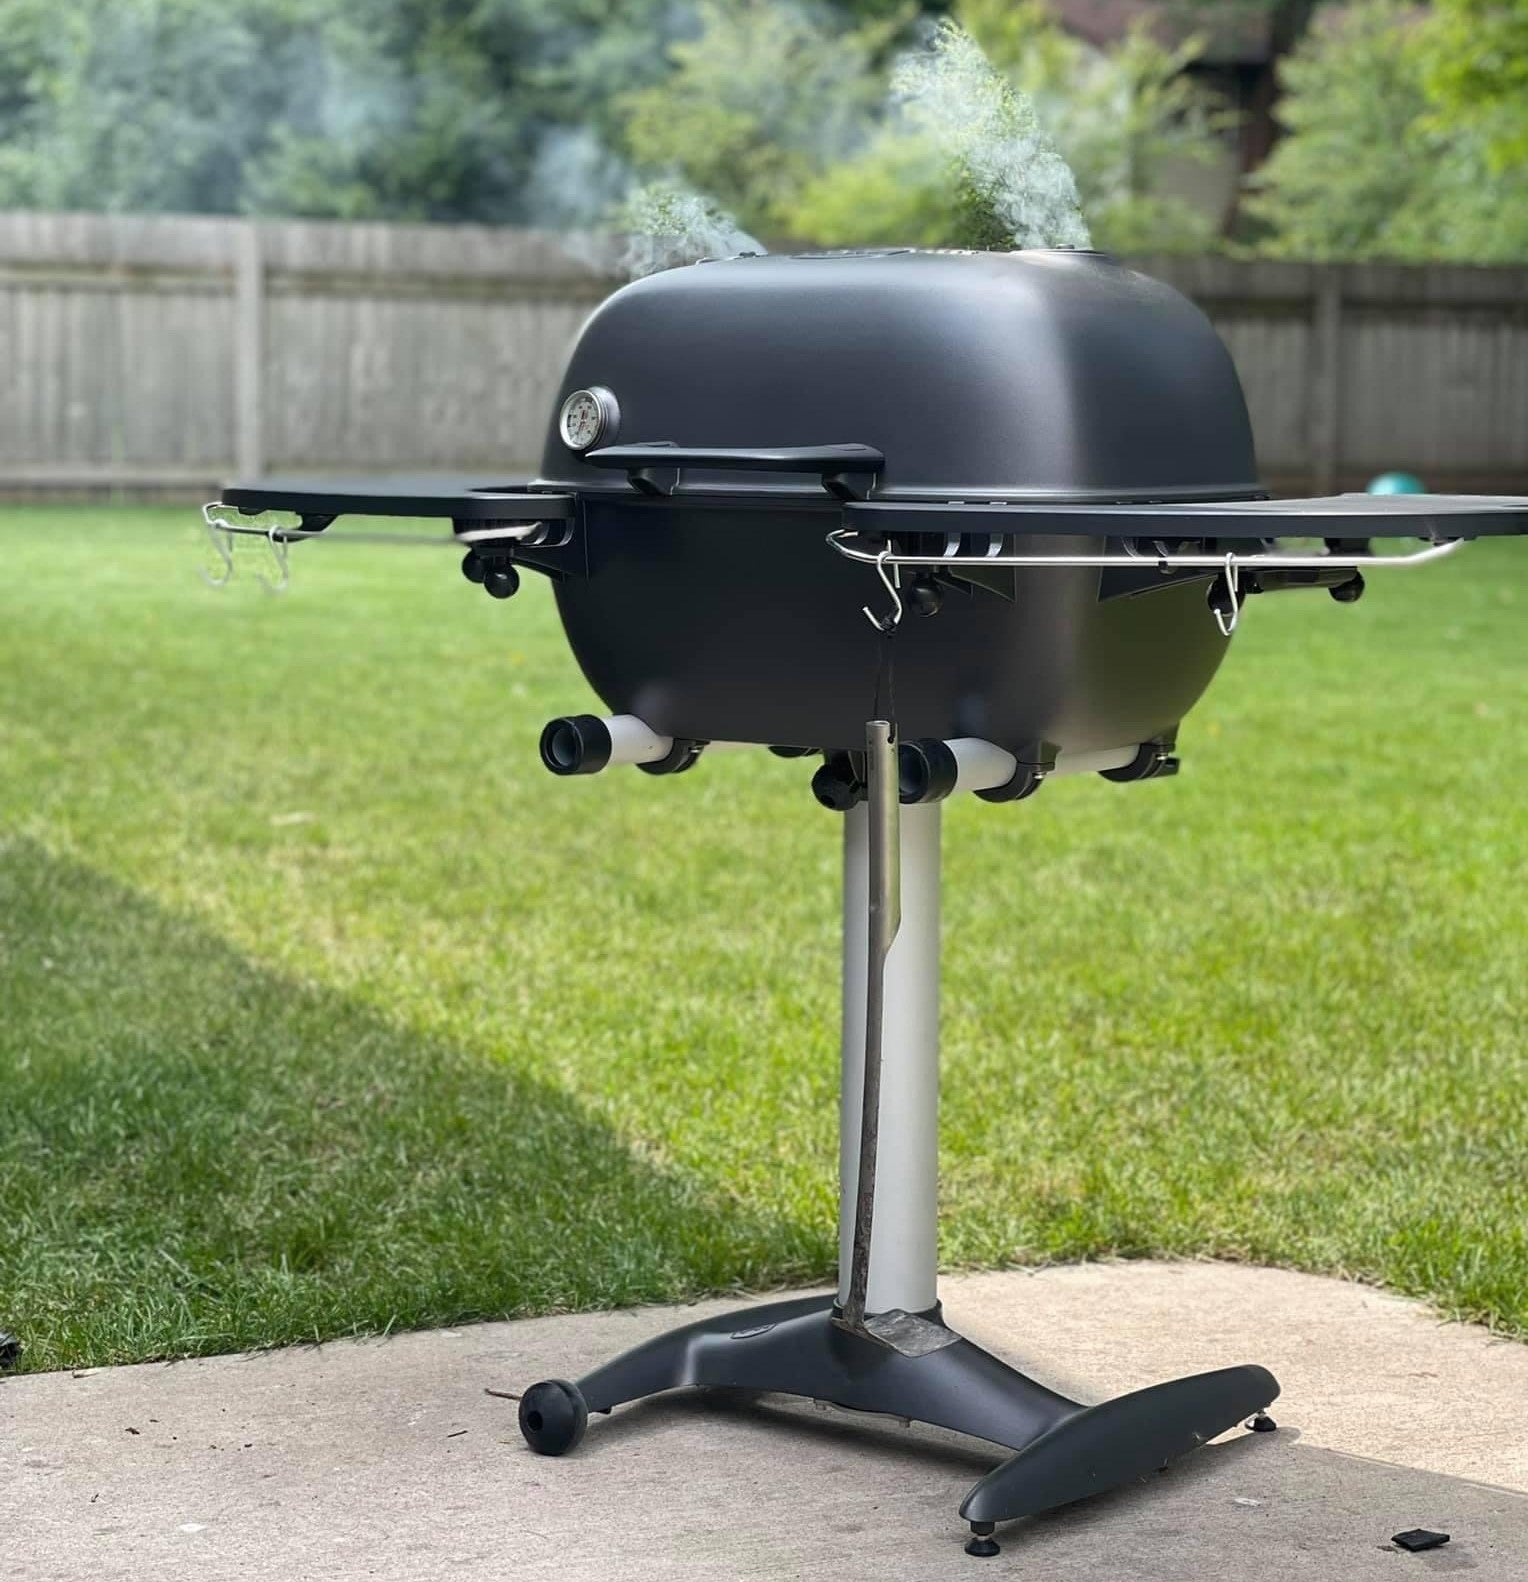 Home - The New PK 360 Grill & Smoker